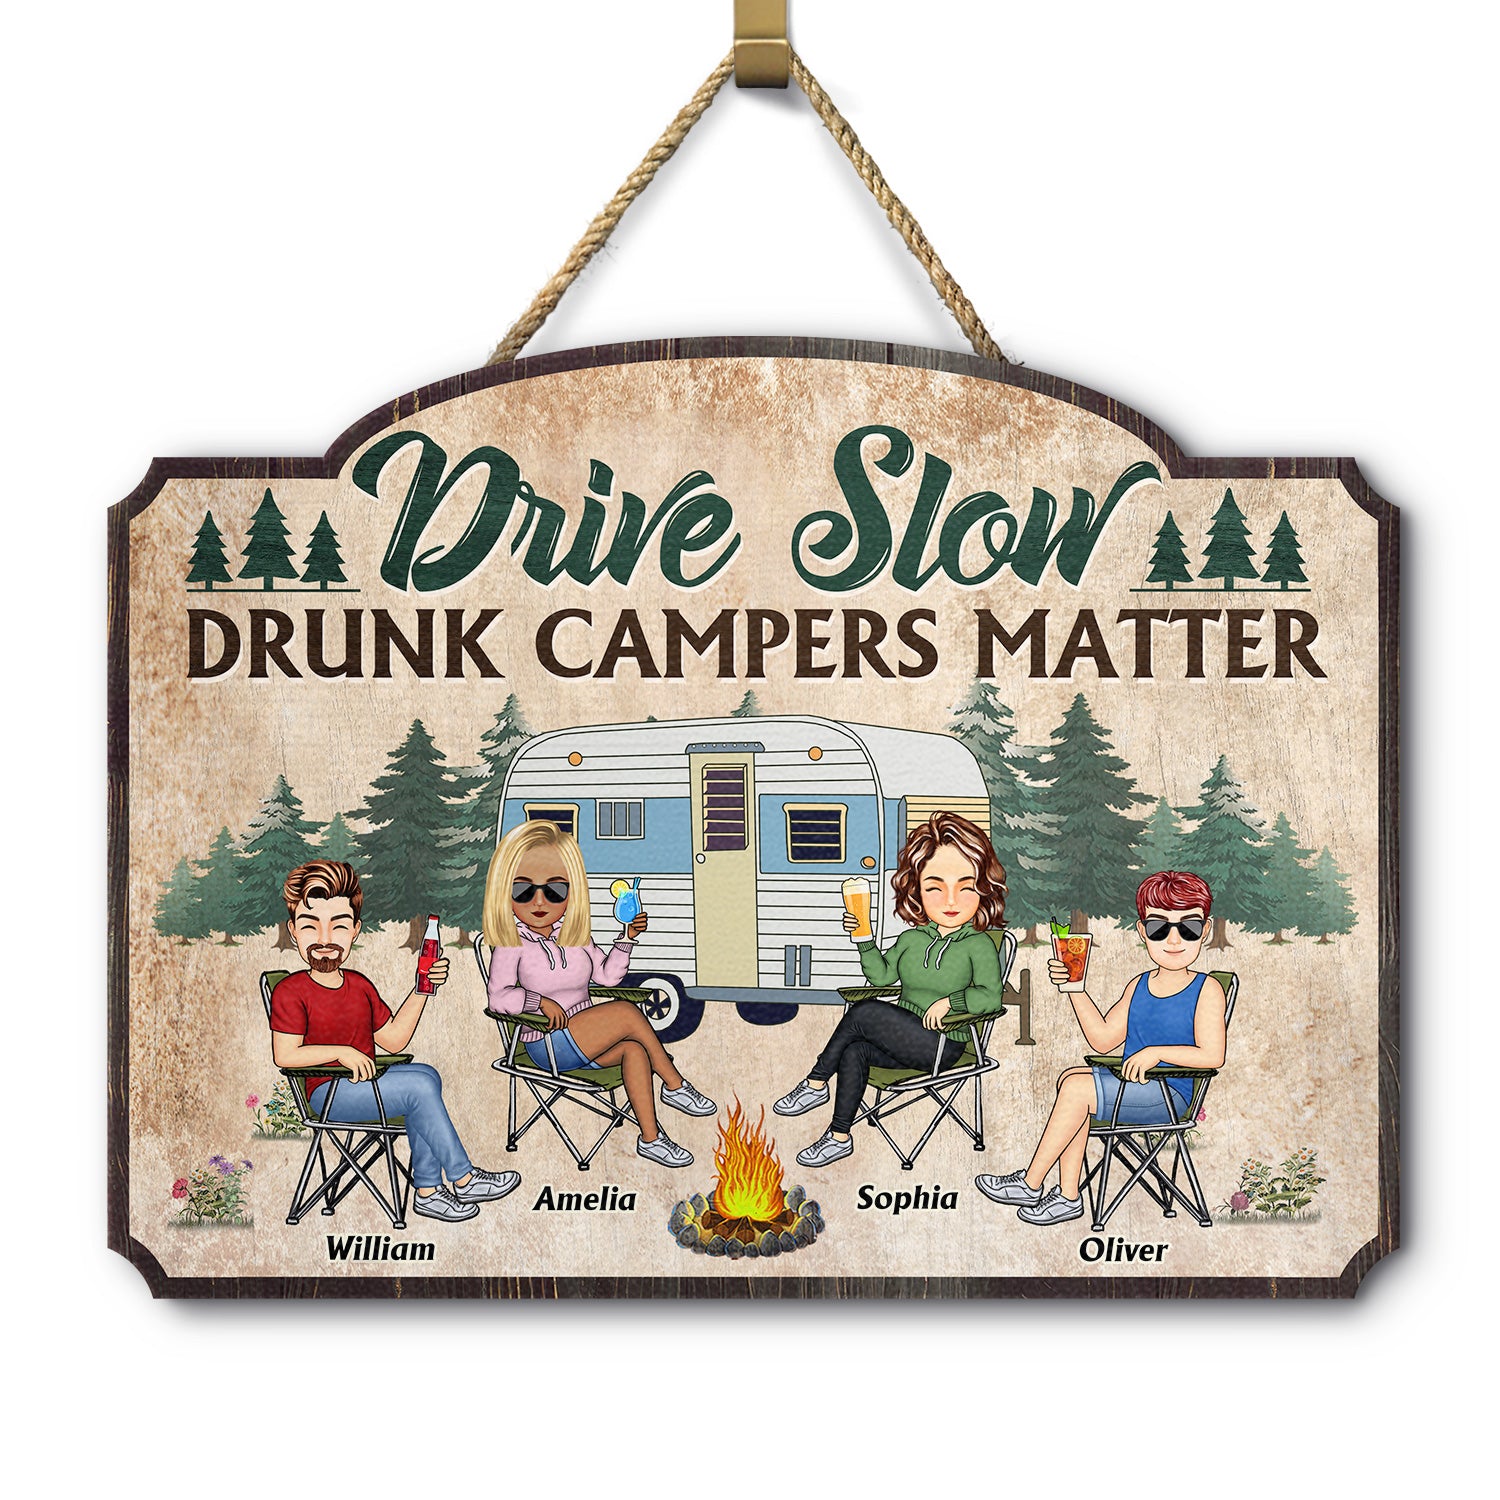 Drive Slow Drunk Campers Matter Camping Traveling - Vacation, Funny Gift For Campers, Besties, Family - Personalized Custom Shaped Wood Sign